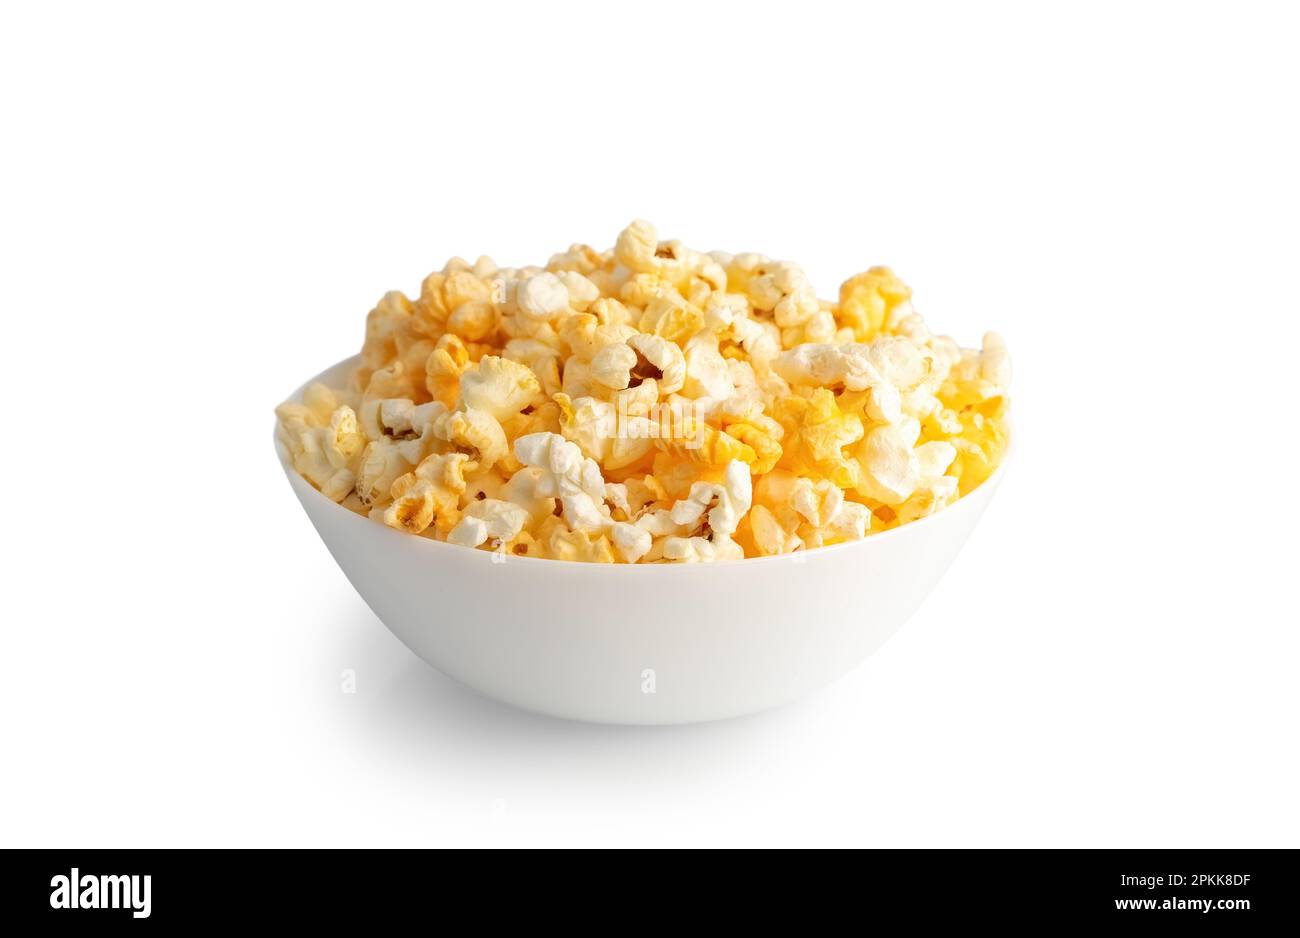 Tasty cheese popcorn in bowl isolated on white background close up. Movies, cinema and entertainment concept. Stock Photo